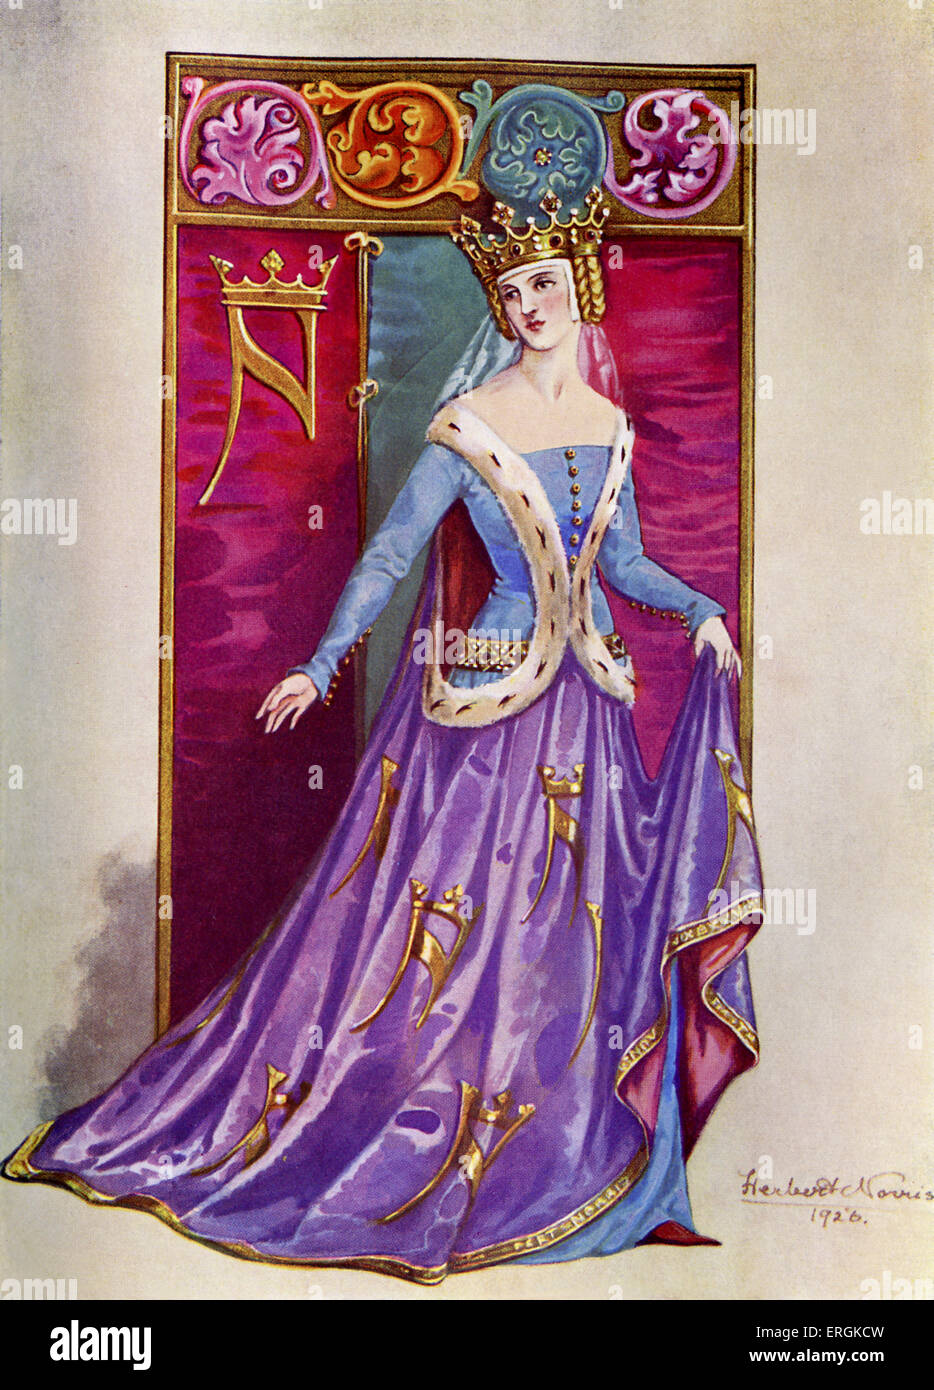 Noblelady, late 14th century, likely during the peiod of Richard II (1367-1400). Herbert Norris artist died 1950 - may require copyright clearance Stock Photo